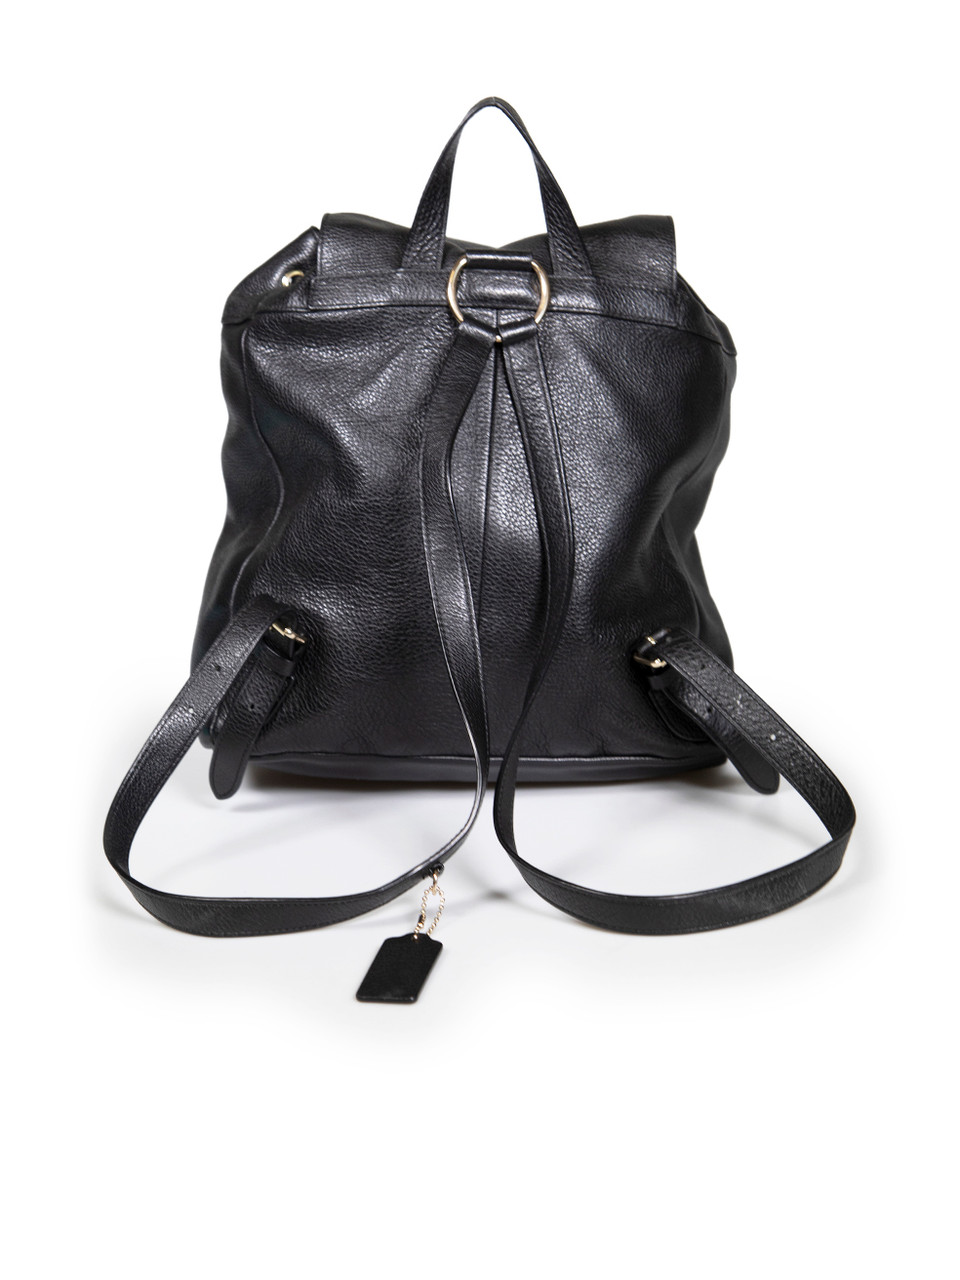 Coach Black Pebbled Leather Backpack